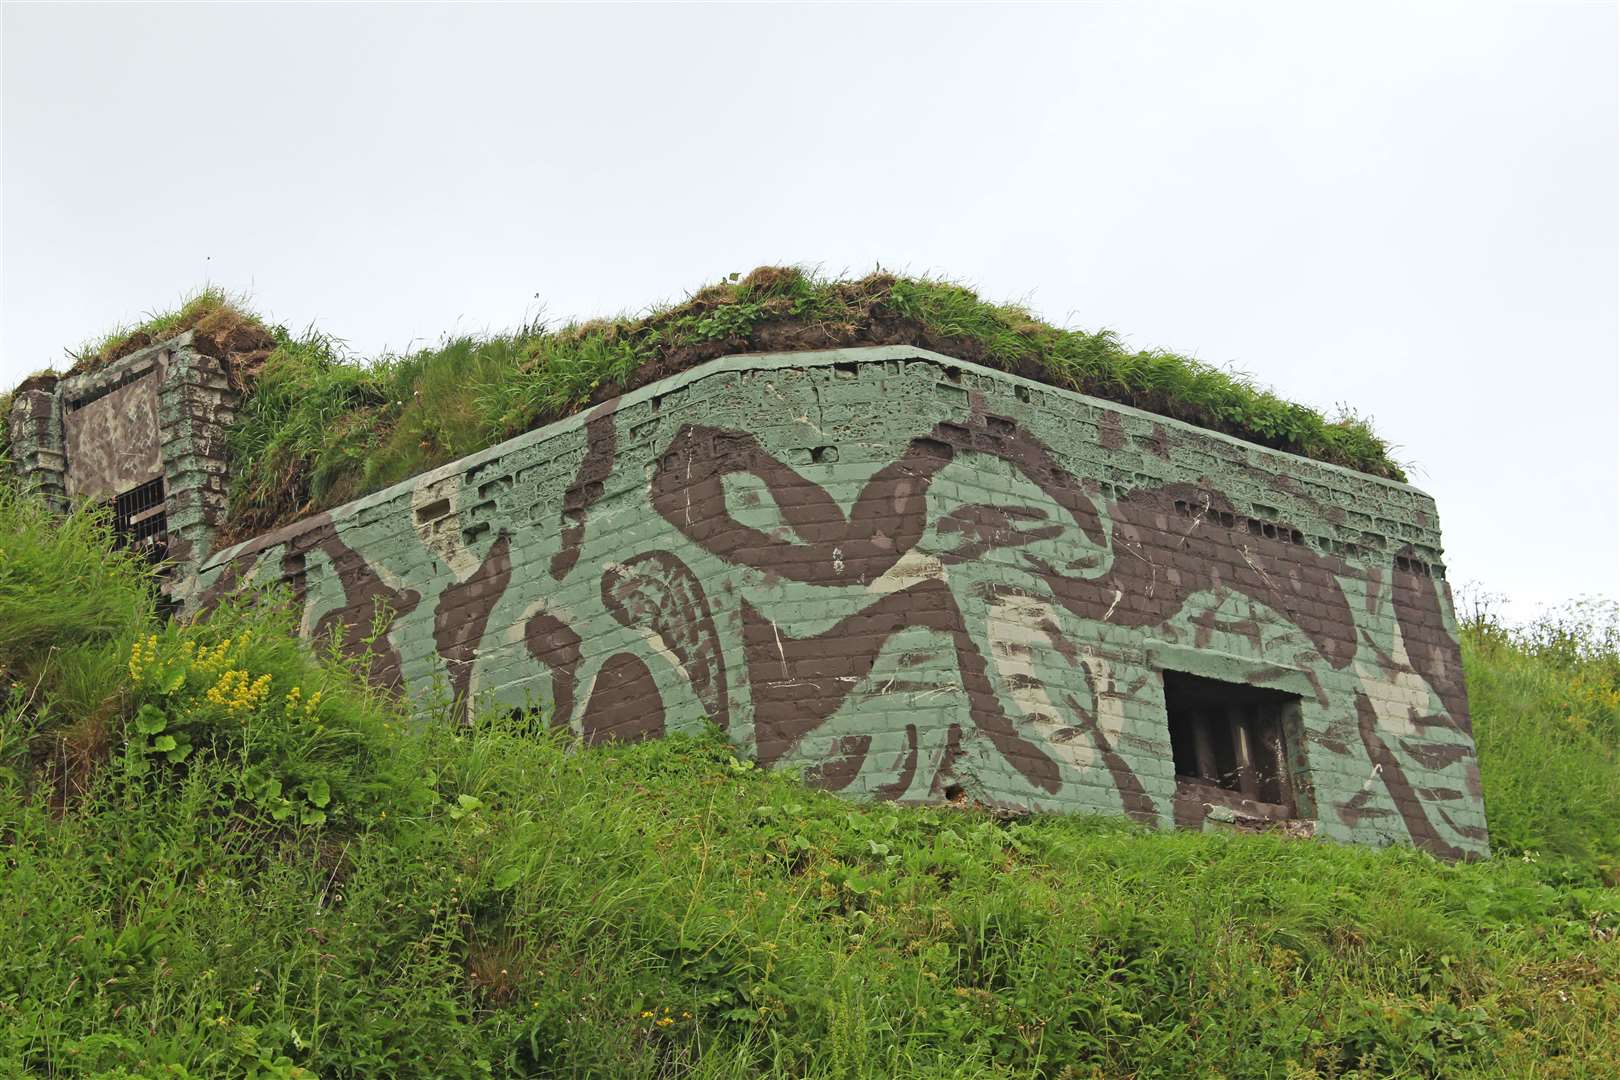 The defensive pillbox above the North Baths with its camouflage paintwork.